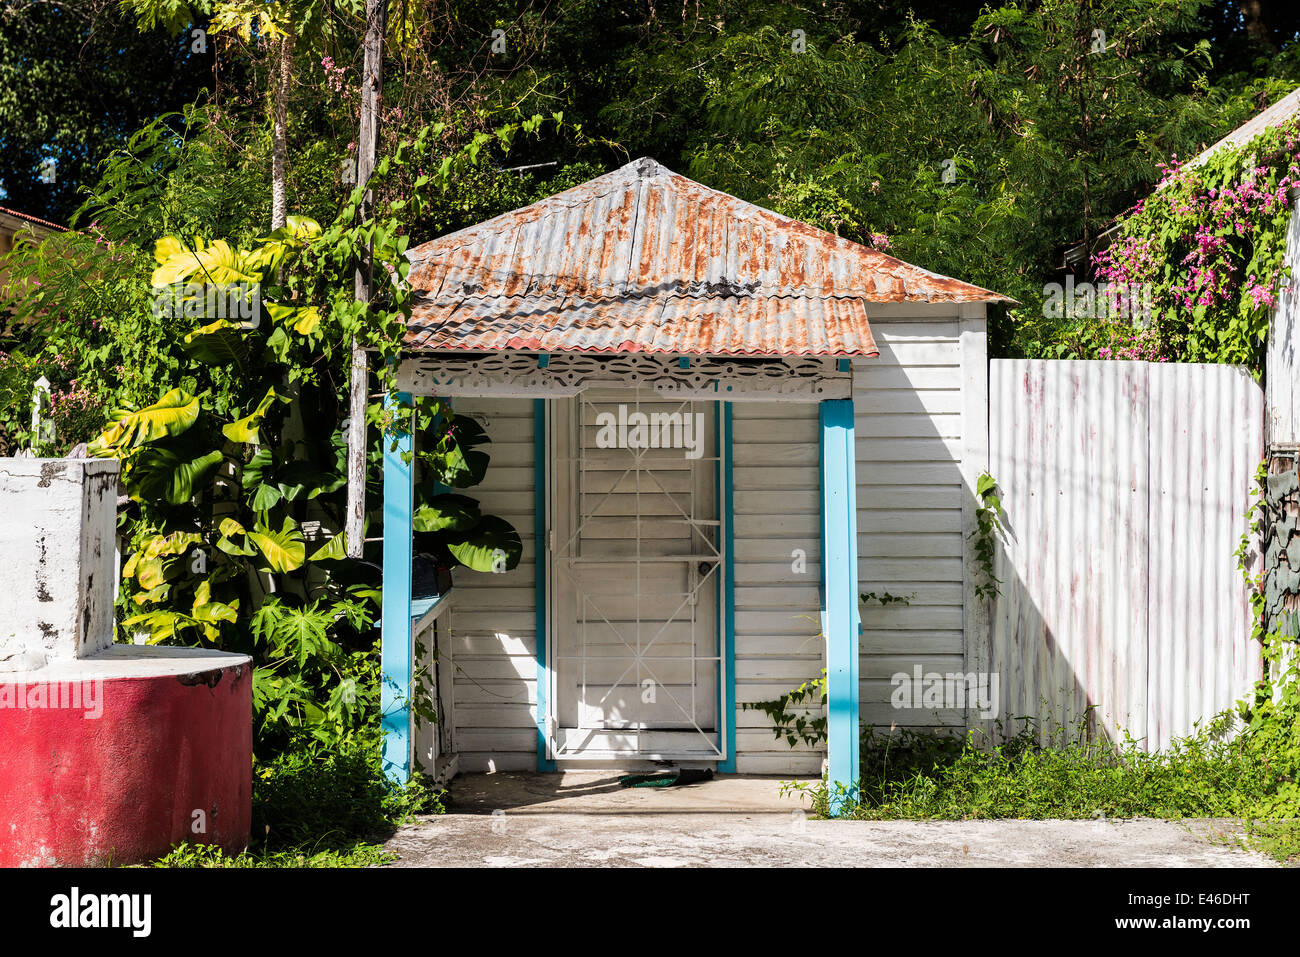 A tiny, and what appears to be a one-room home with a rusted tin roof, in Frederiksted, St. Croix, U.S. Virgin Islands. Stock Photo